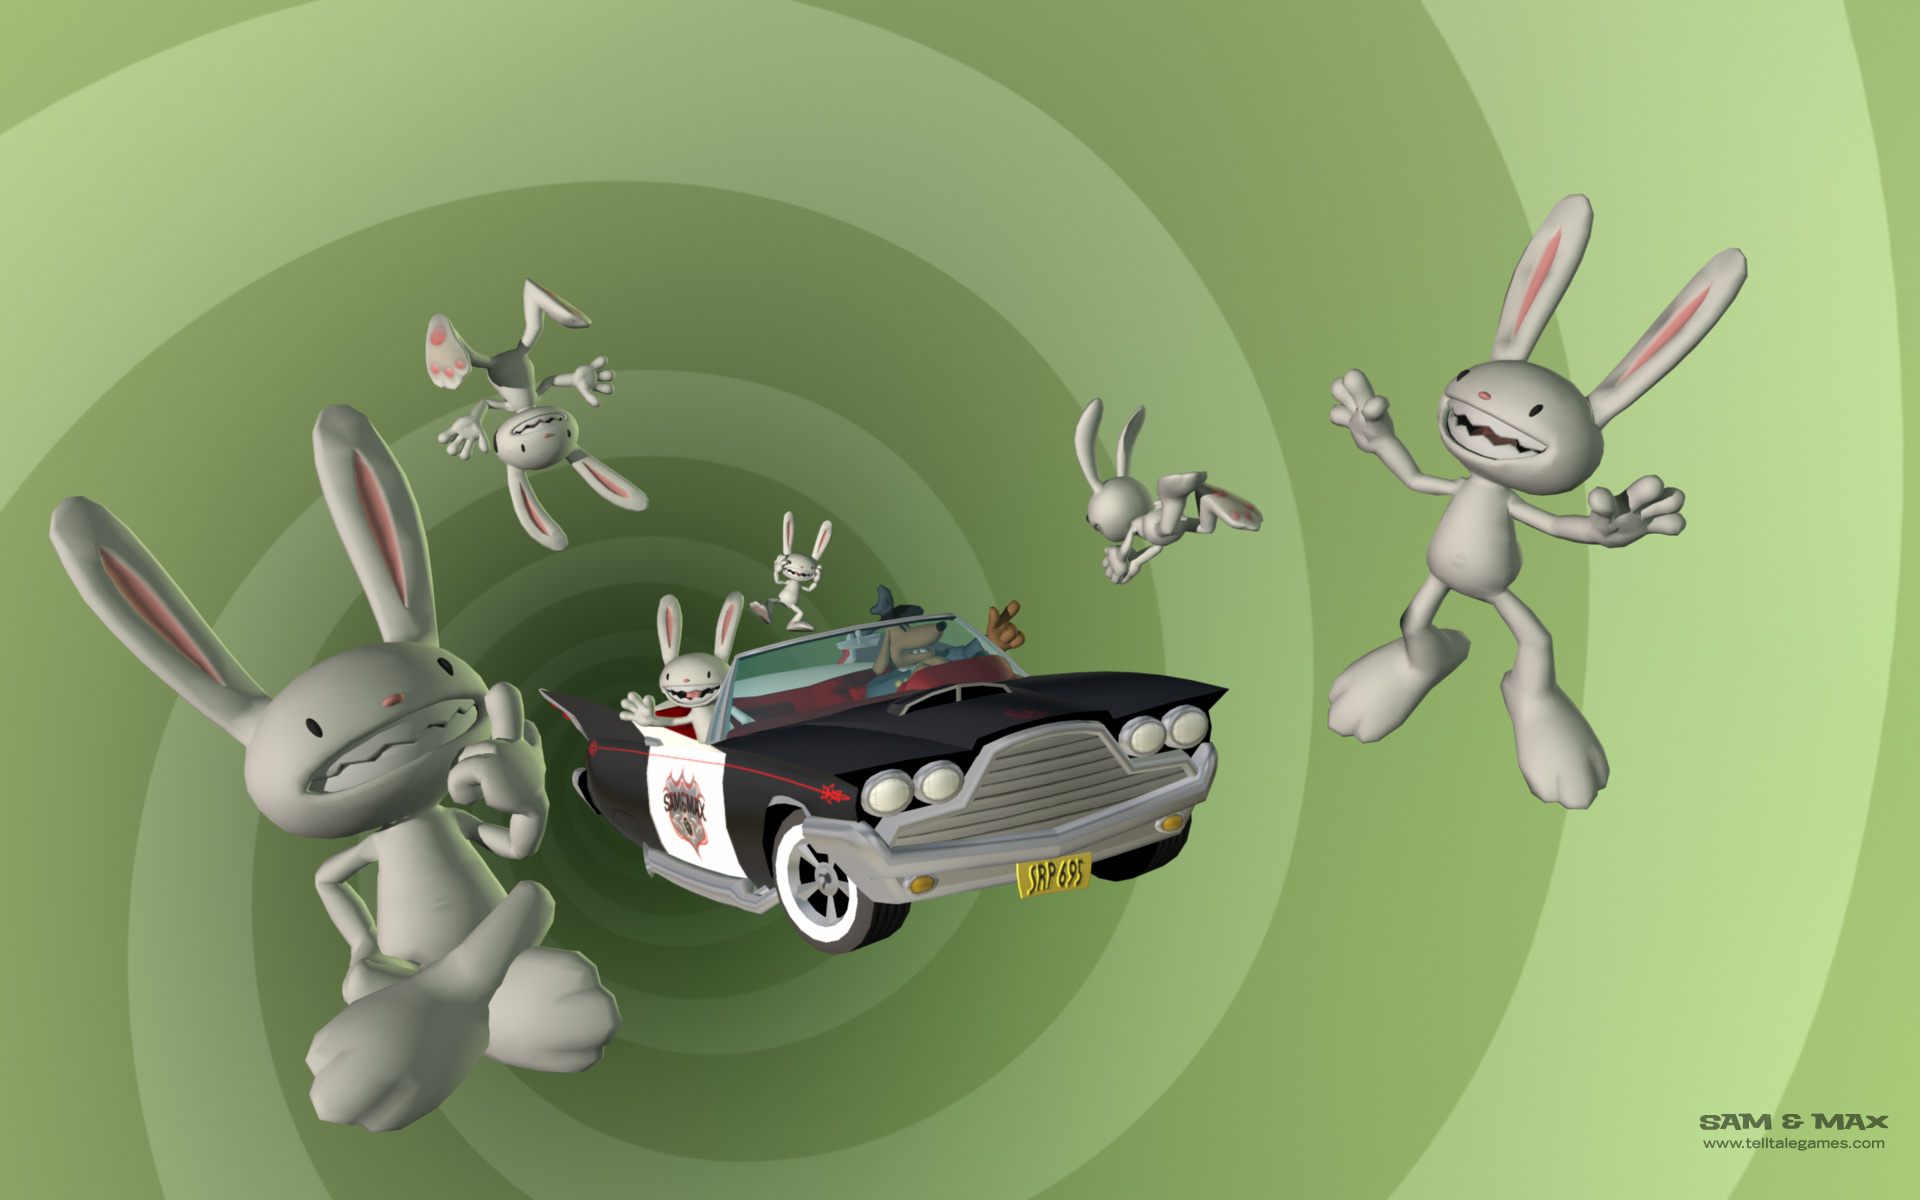 Sam & Max HD Wallpapers and Backgrounds